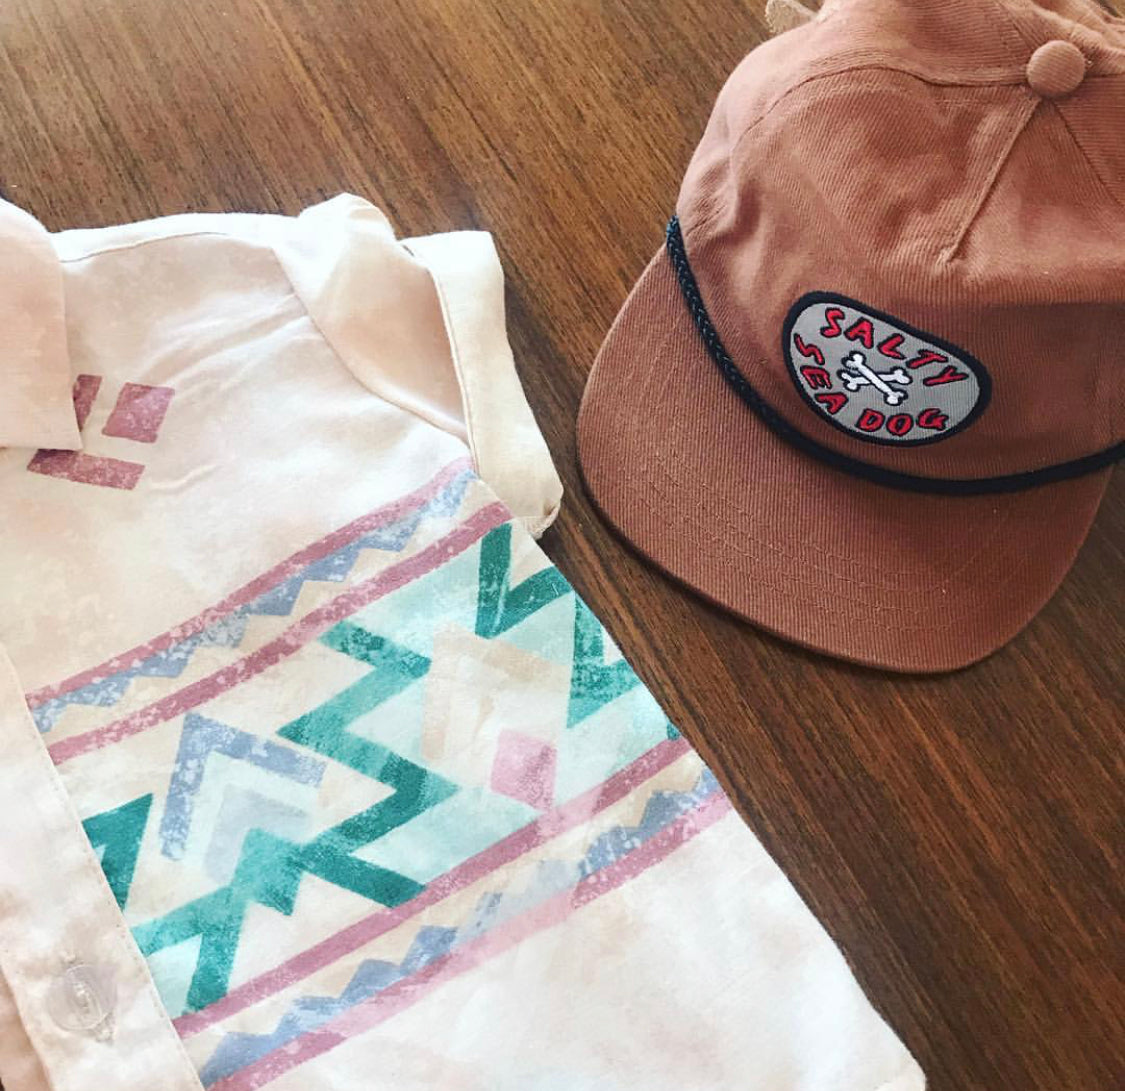 Alfie Salty Sea Dog Tan Cotton Twill 5 Panel Kids Cap Hat with Alfie Party Shirt . Designed in Australia.